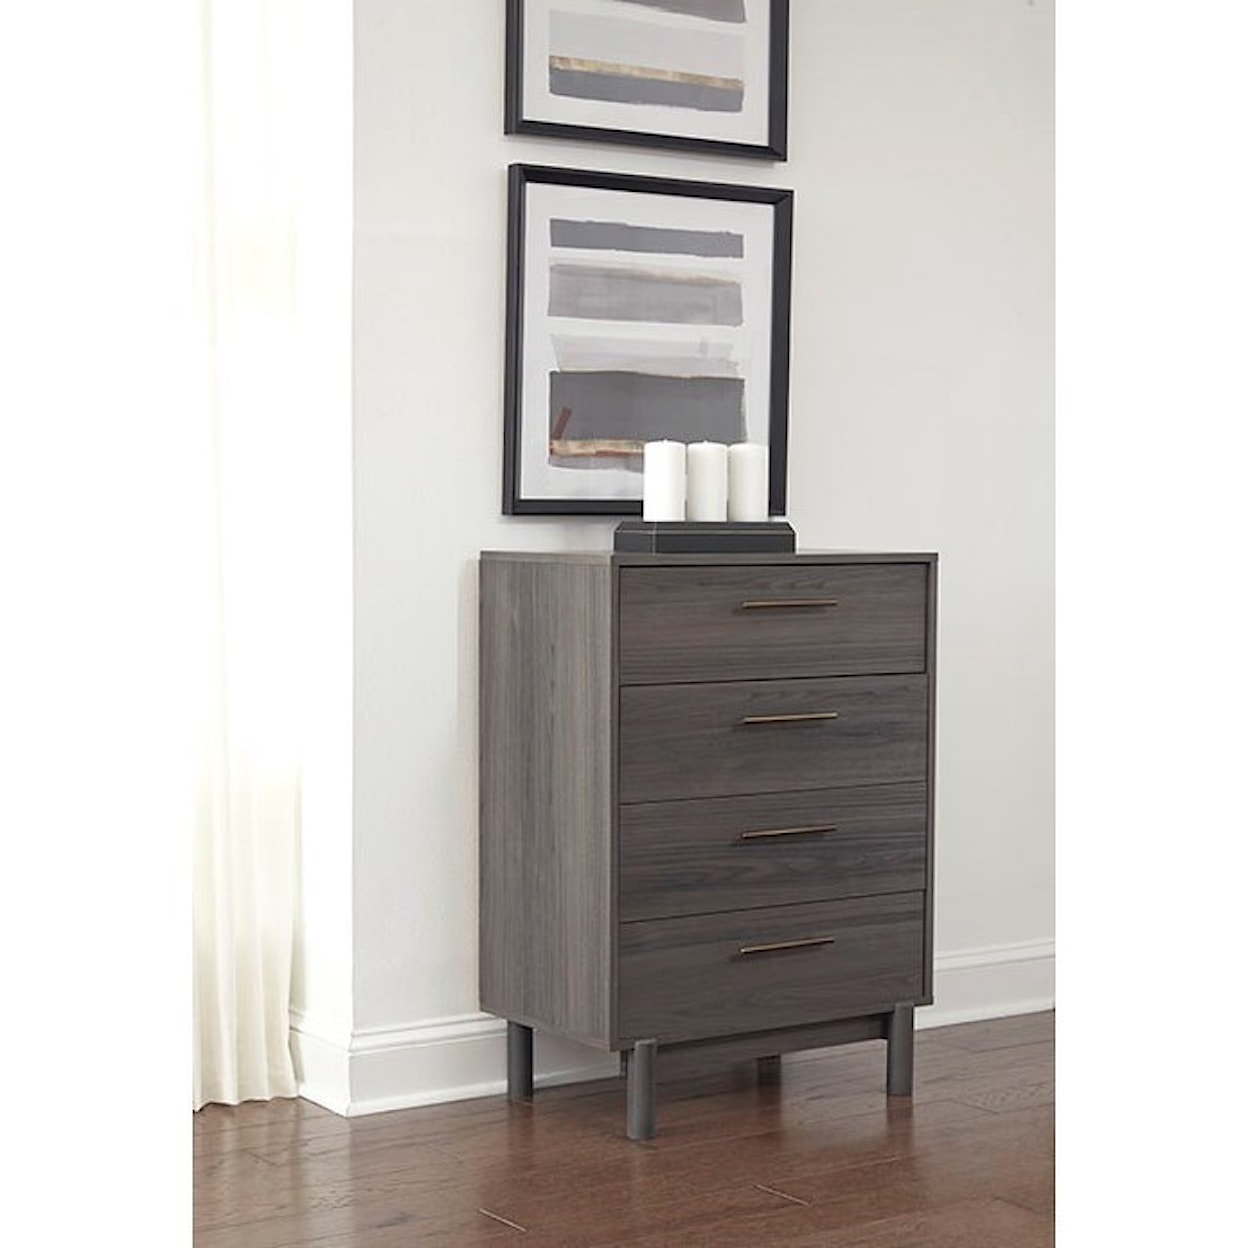 Signature Design by Ashley Brymont Drawer Chest